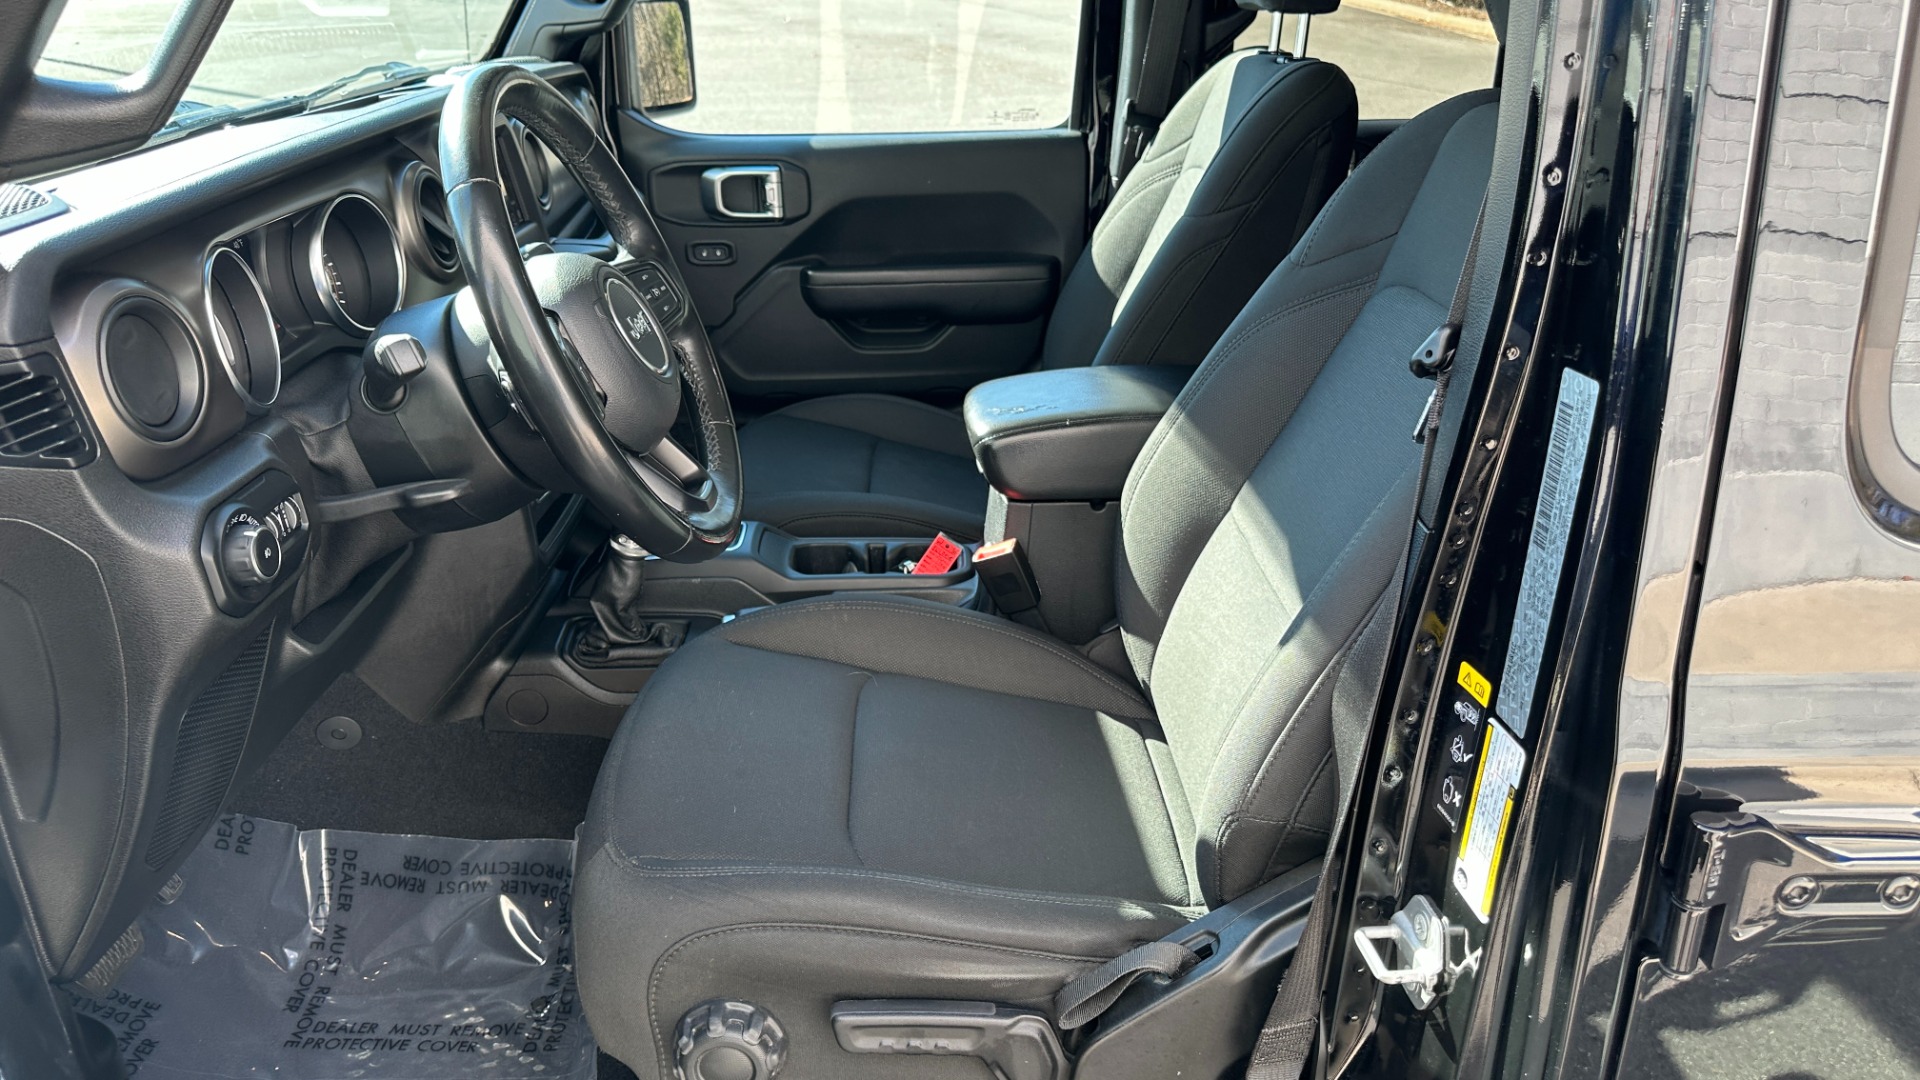 Used 2020 Jeep Wrangler Unlimited SPORT S / TECH PACKAGE / S PACKAGE / BLACK 3 PIECE HARD TOP for sale $25,995 at Formula Imports in Charlotte NC 28227 12